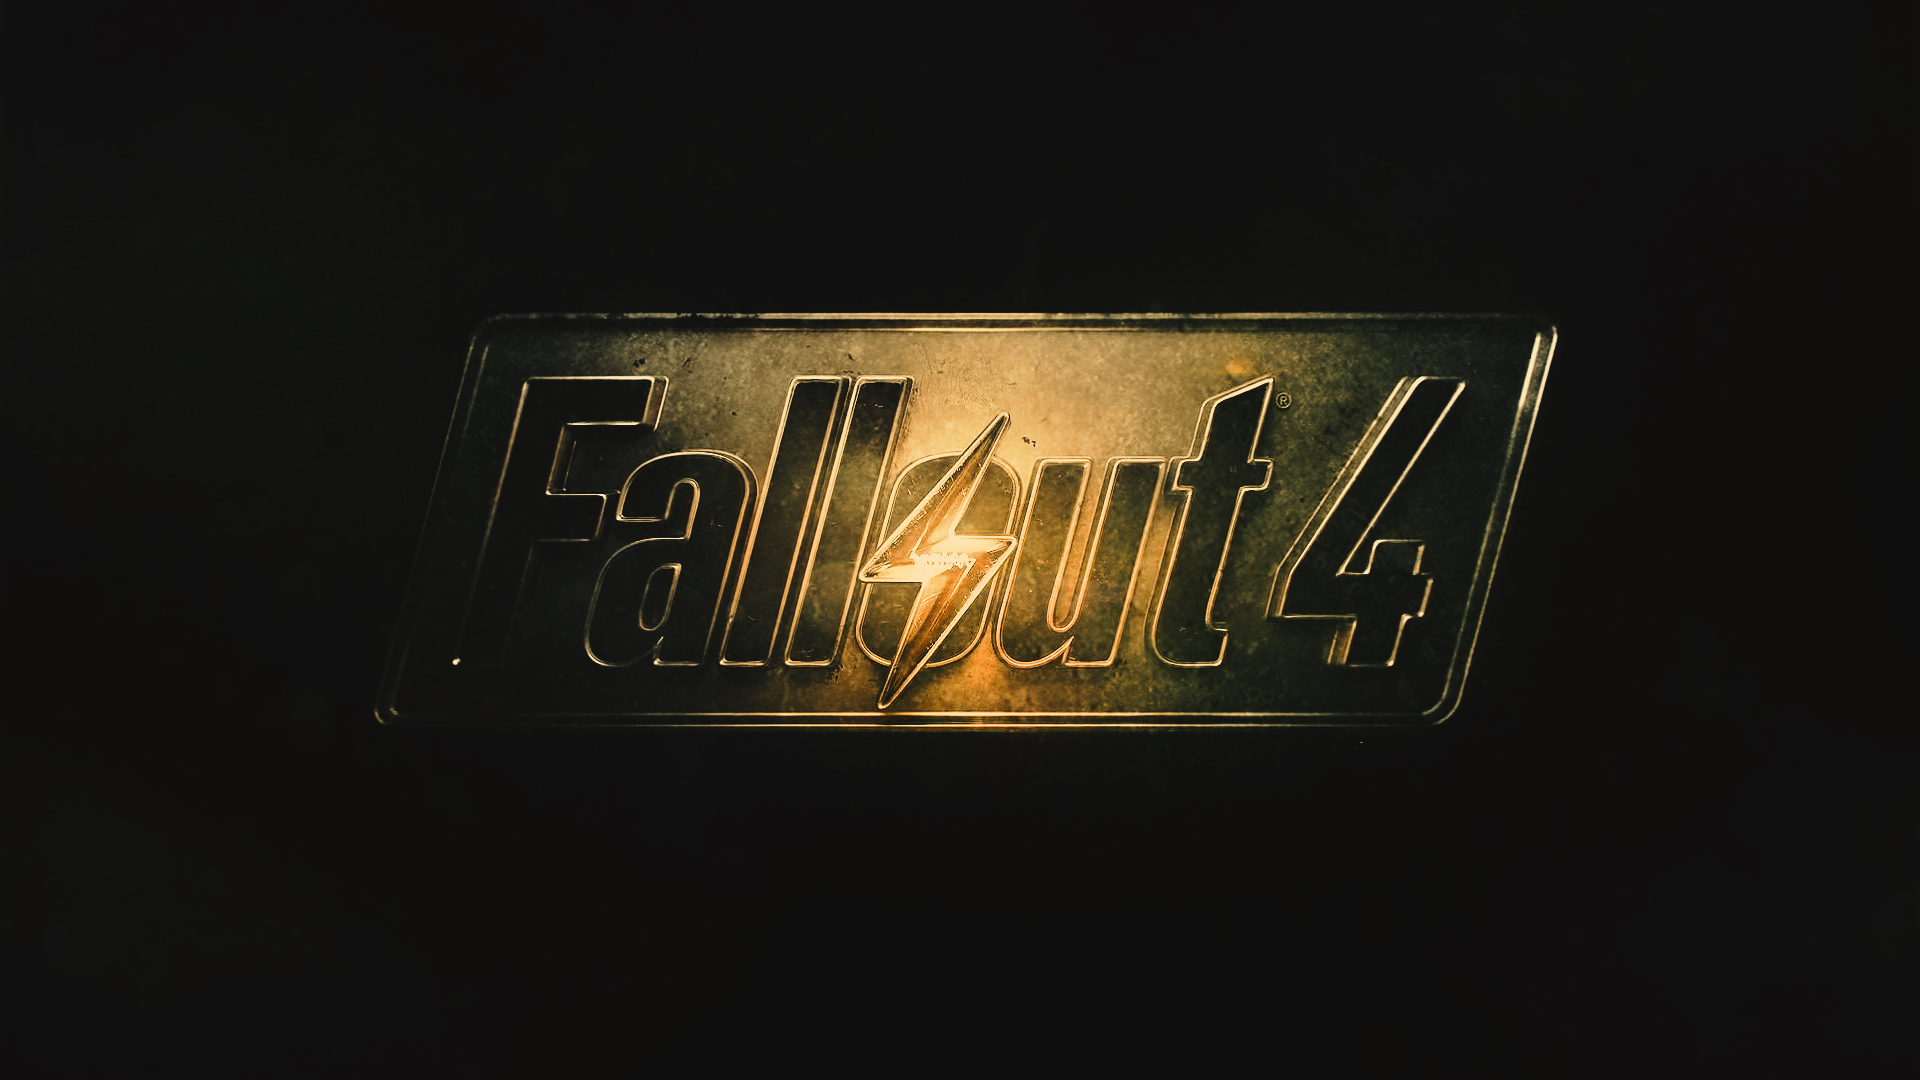 Fallout wallpapers by AronMar